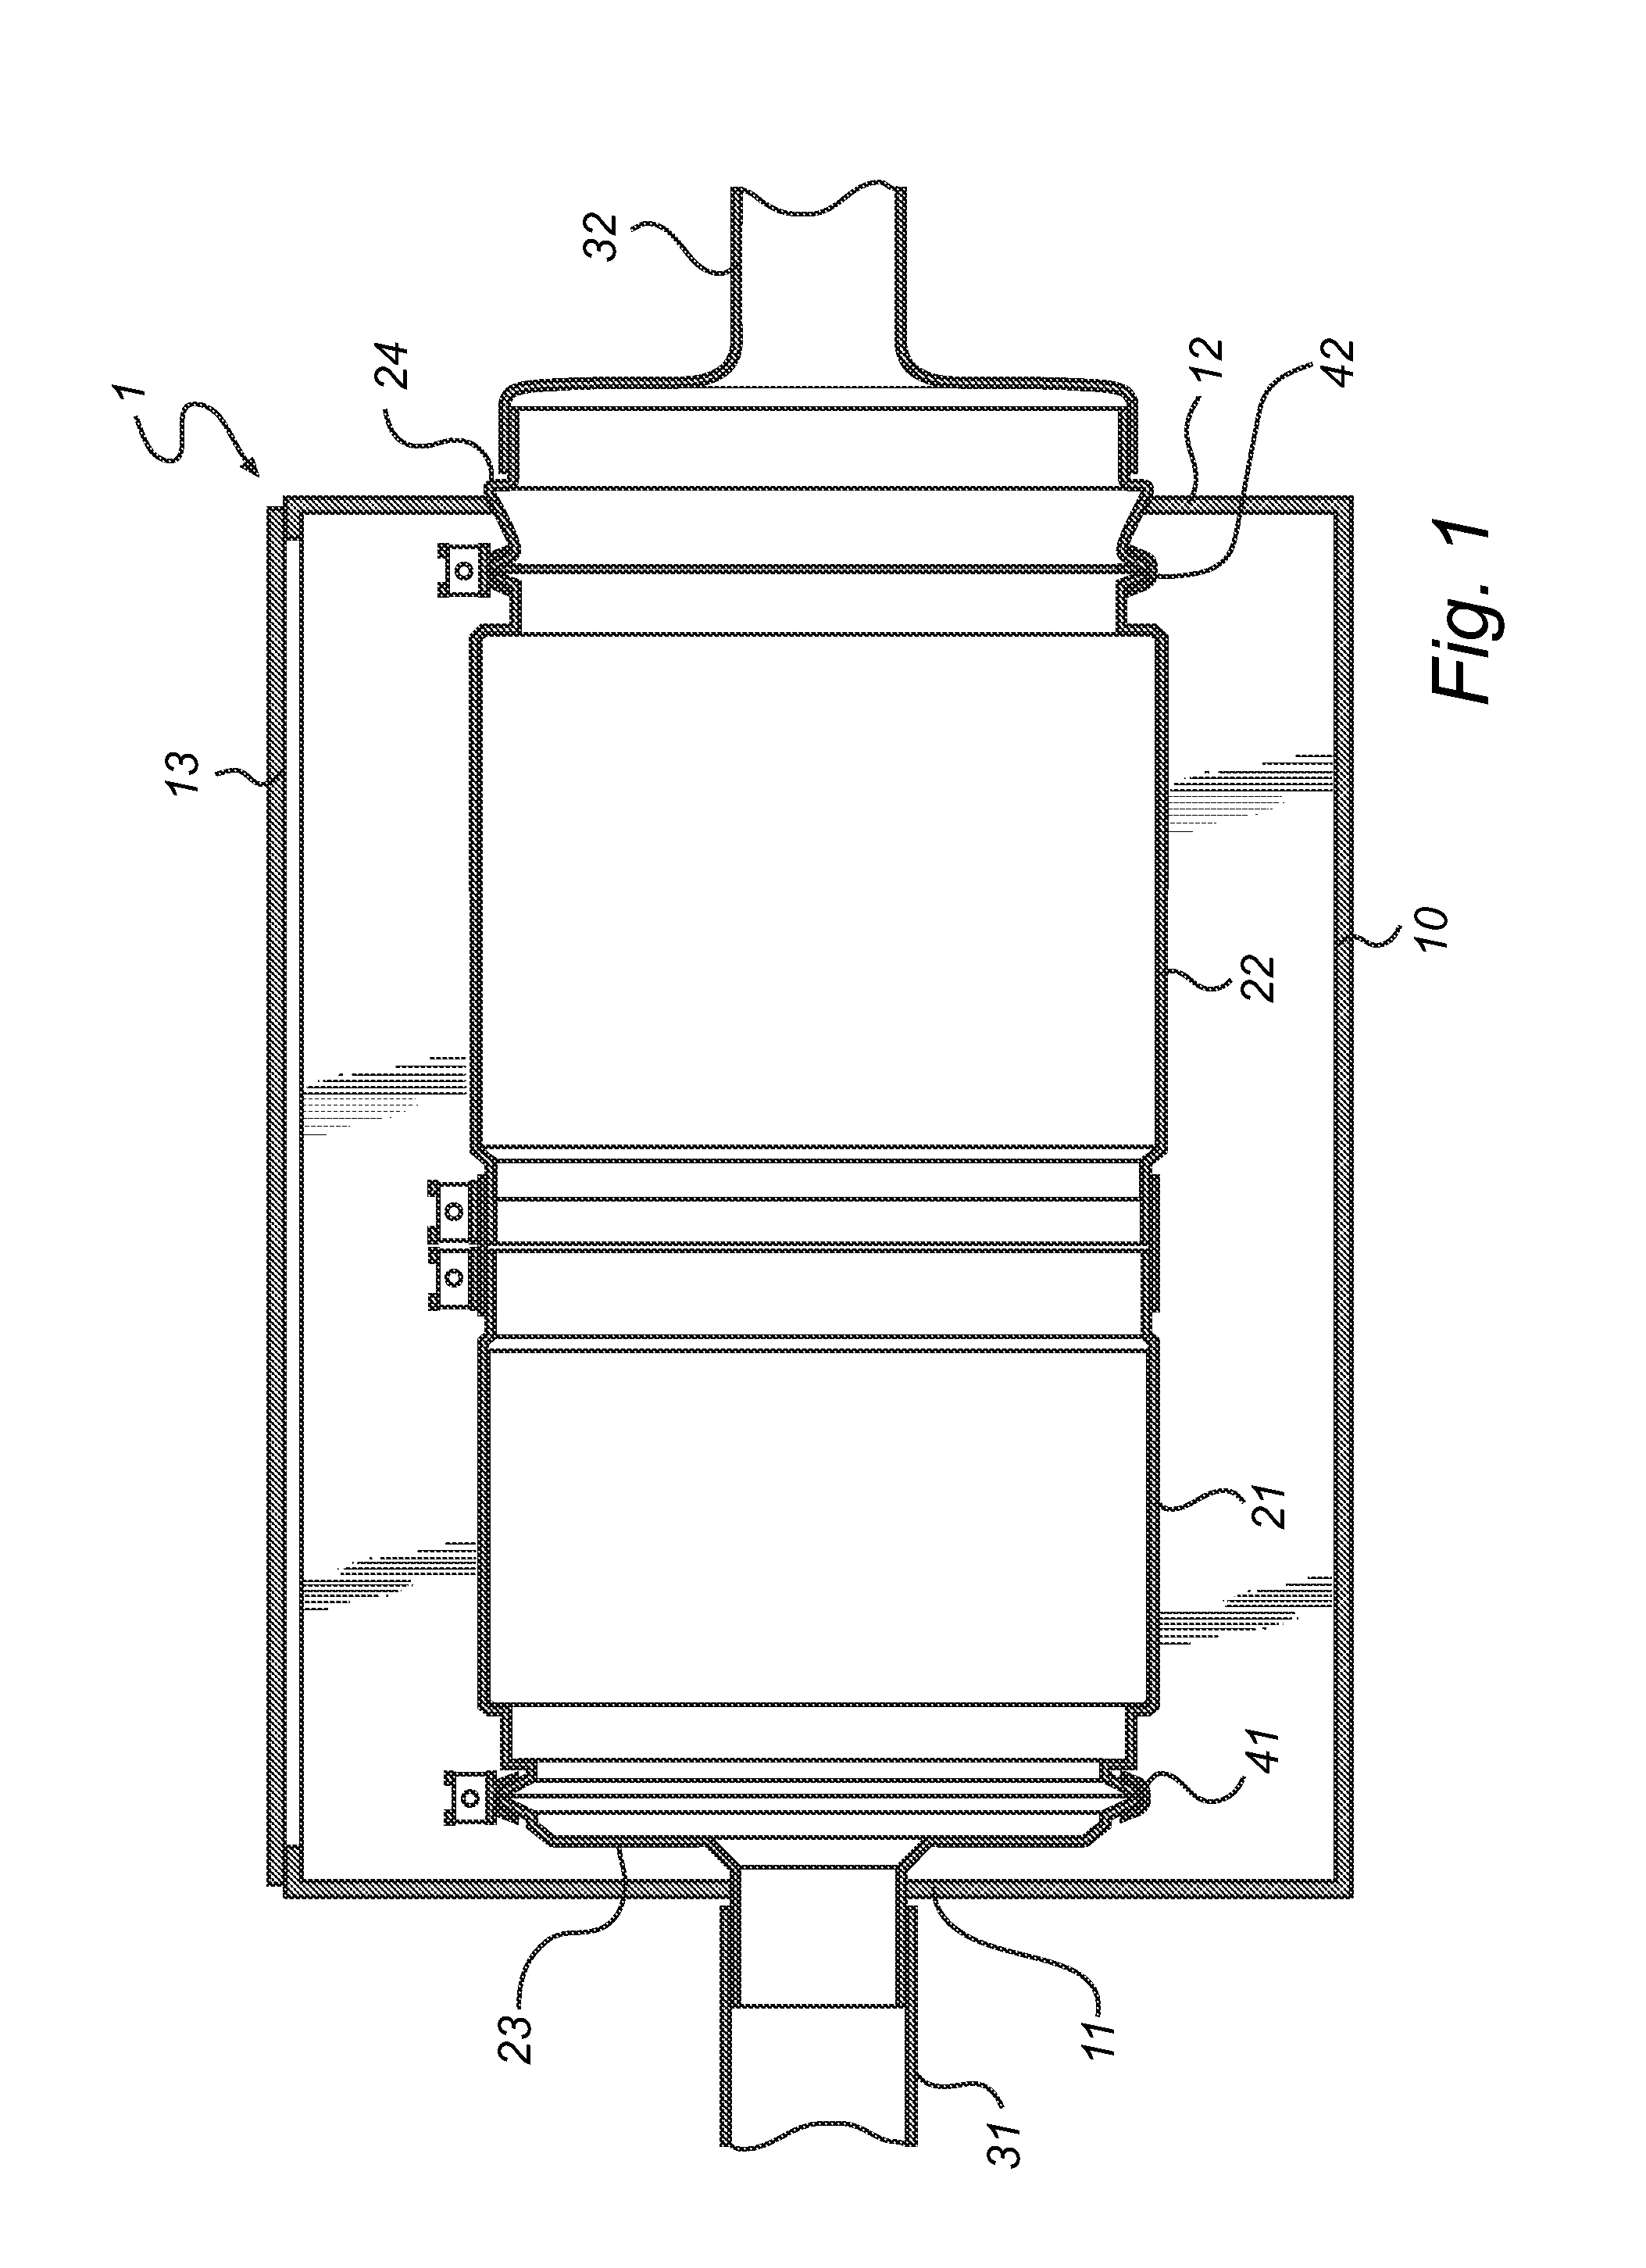 Apparatus for treating an exhaust gas stream with removable module